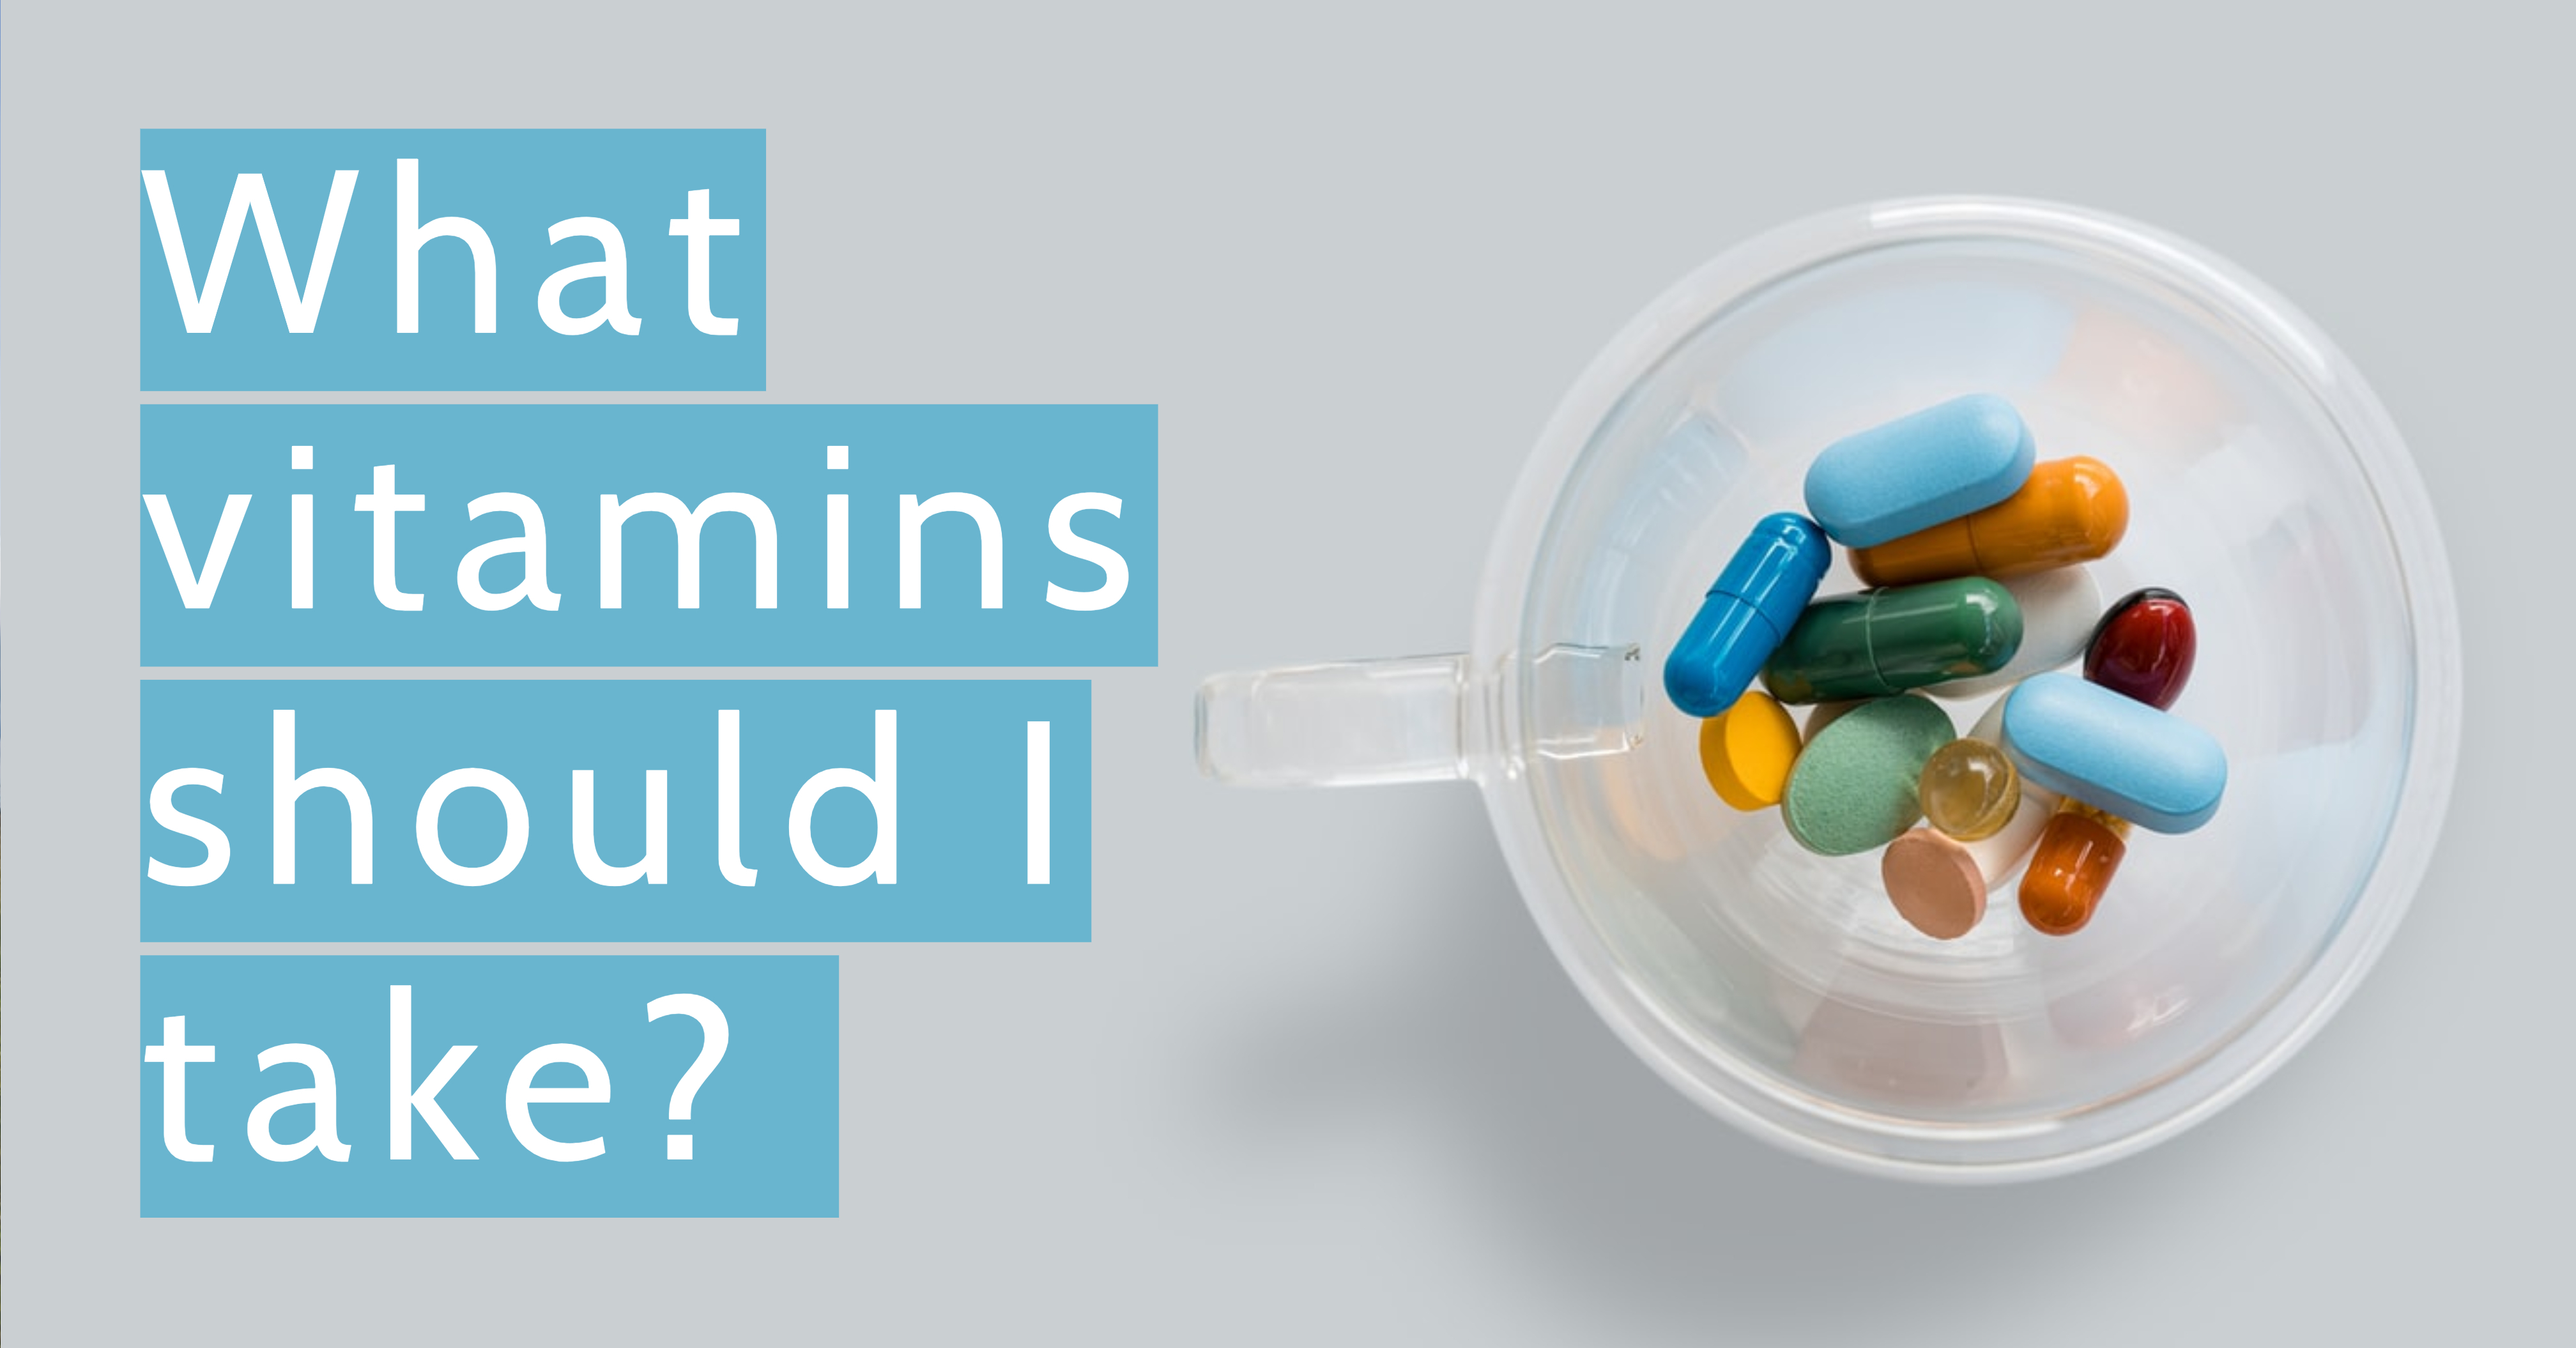 Blog - What vitamins should I take? - Bodybuilding and Sports Supplements